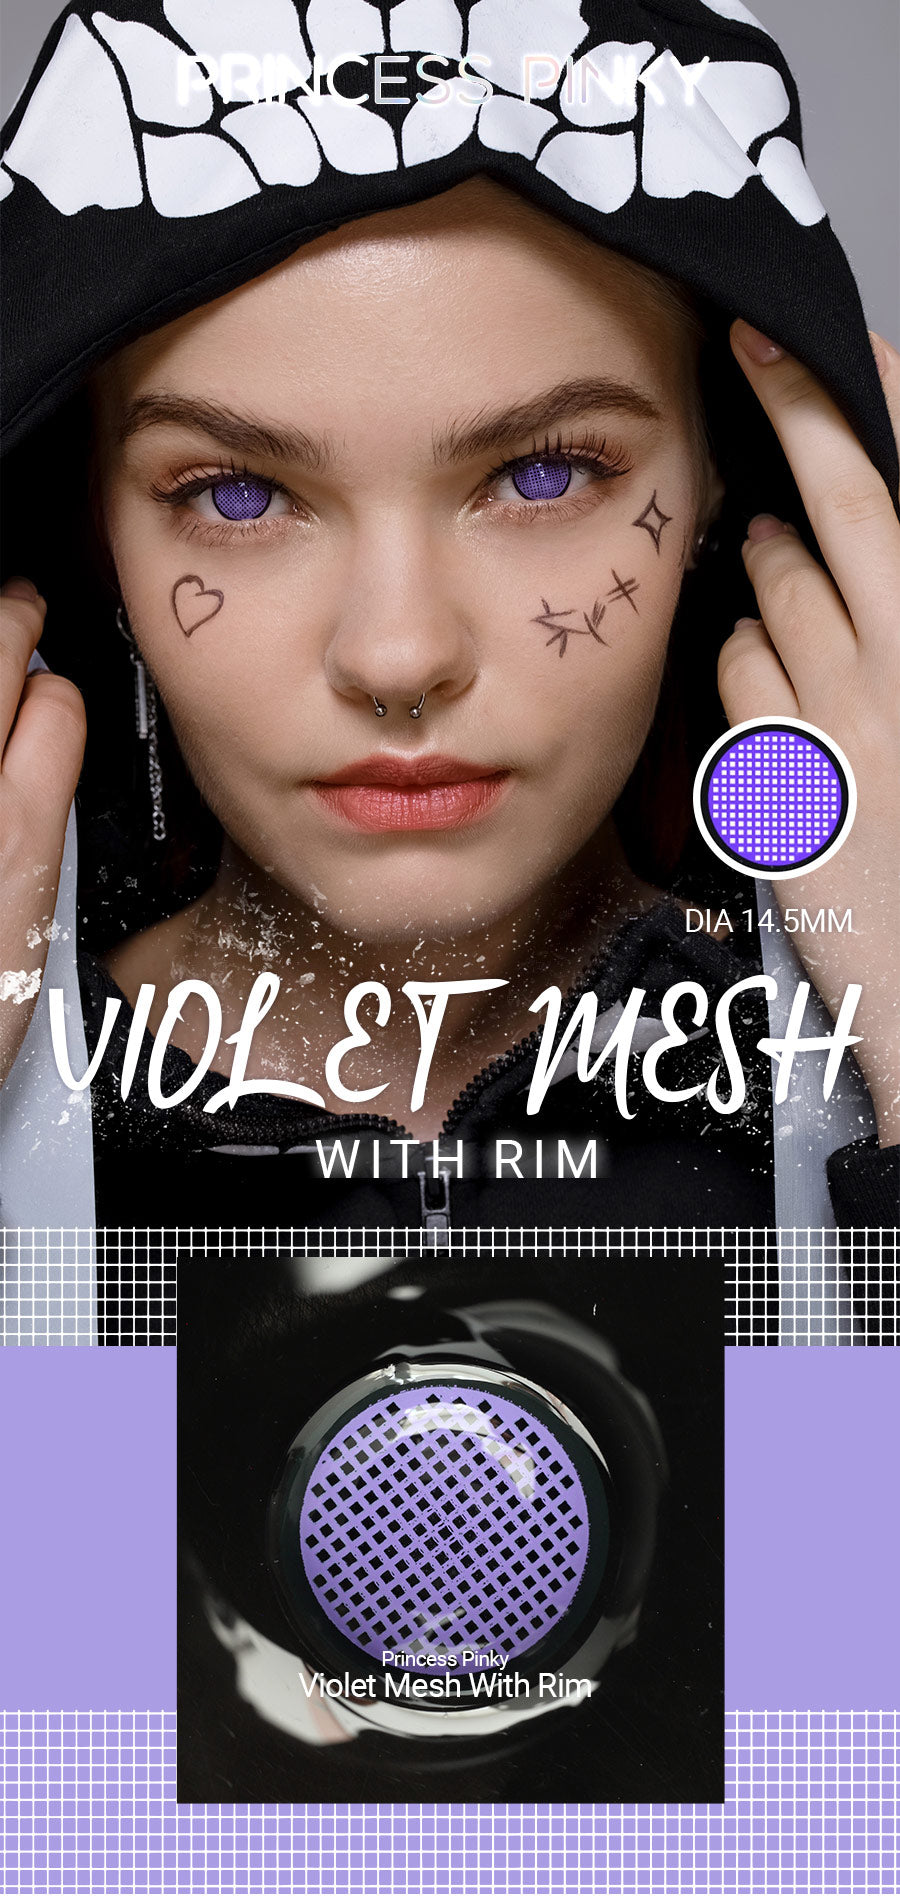 Violet mesh colored contact lenses for cosplay